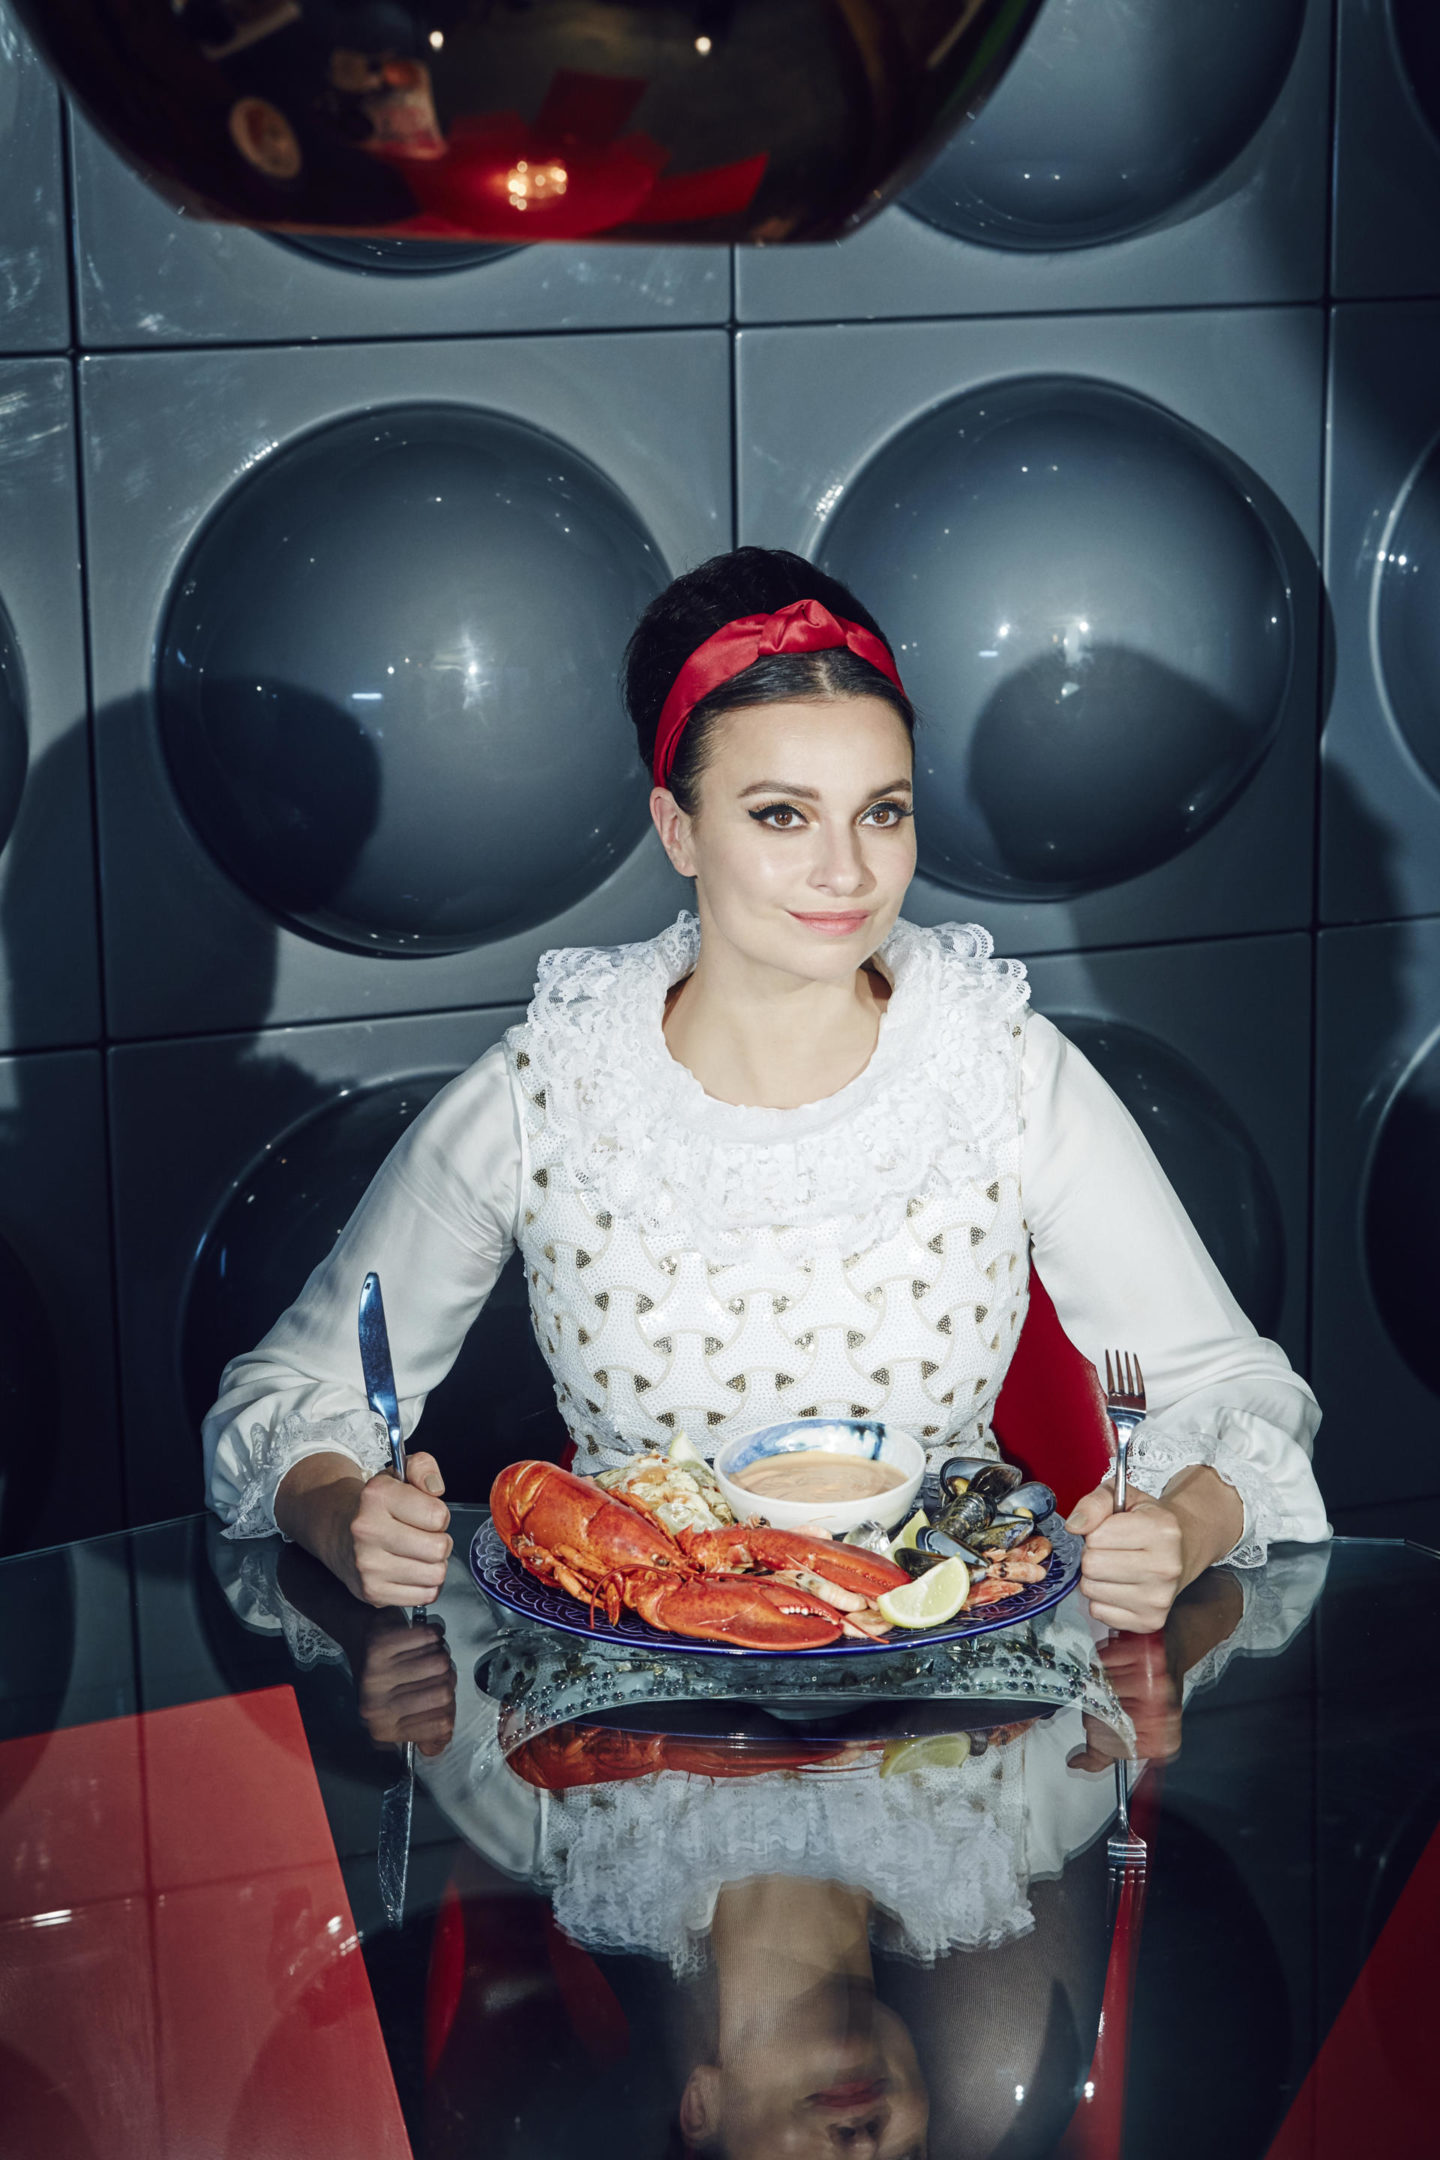 GIZZI ERSKINE ON CLEAN EATING & A CRACKING CHRISTMAS DINNER